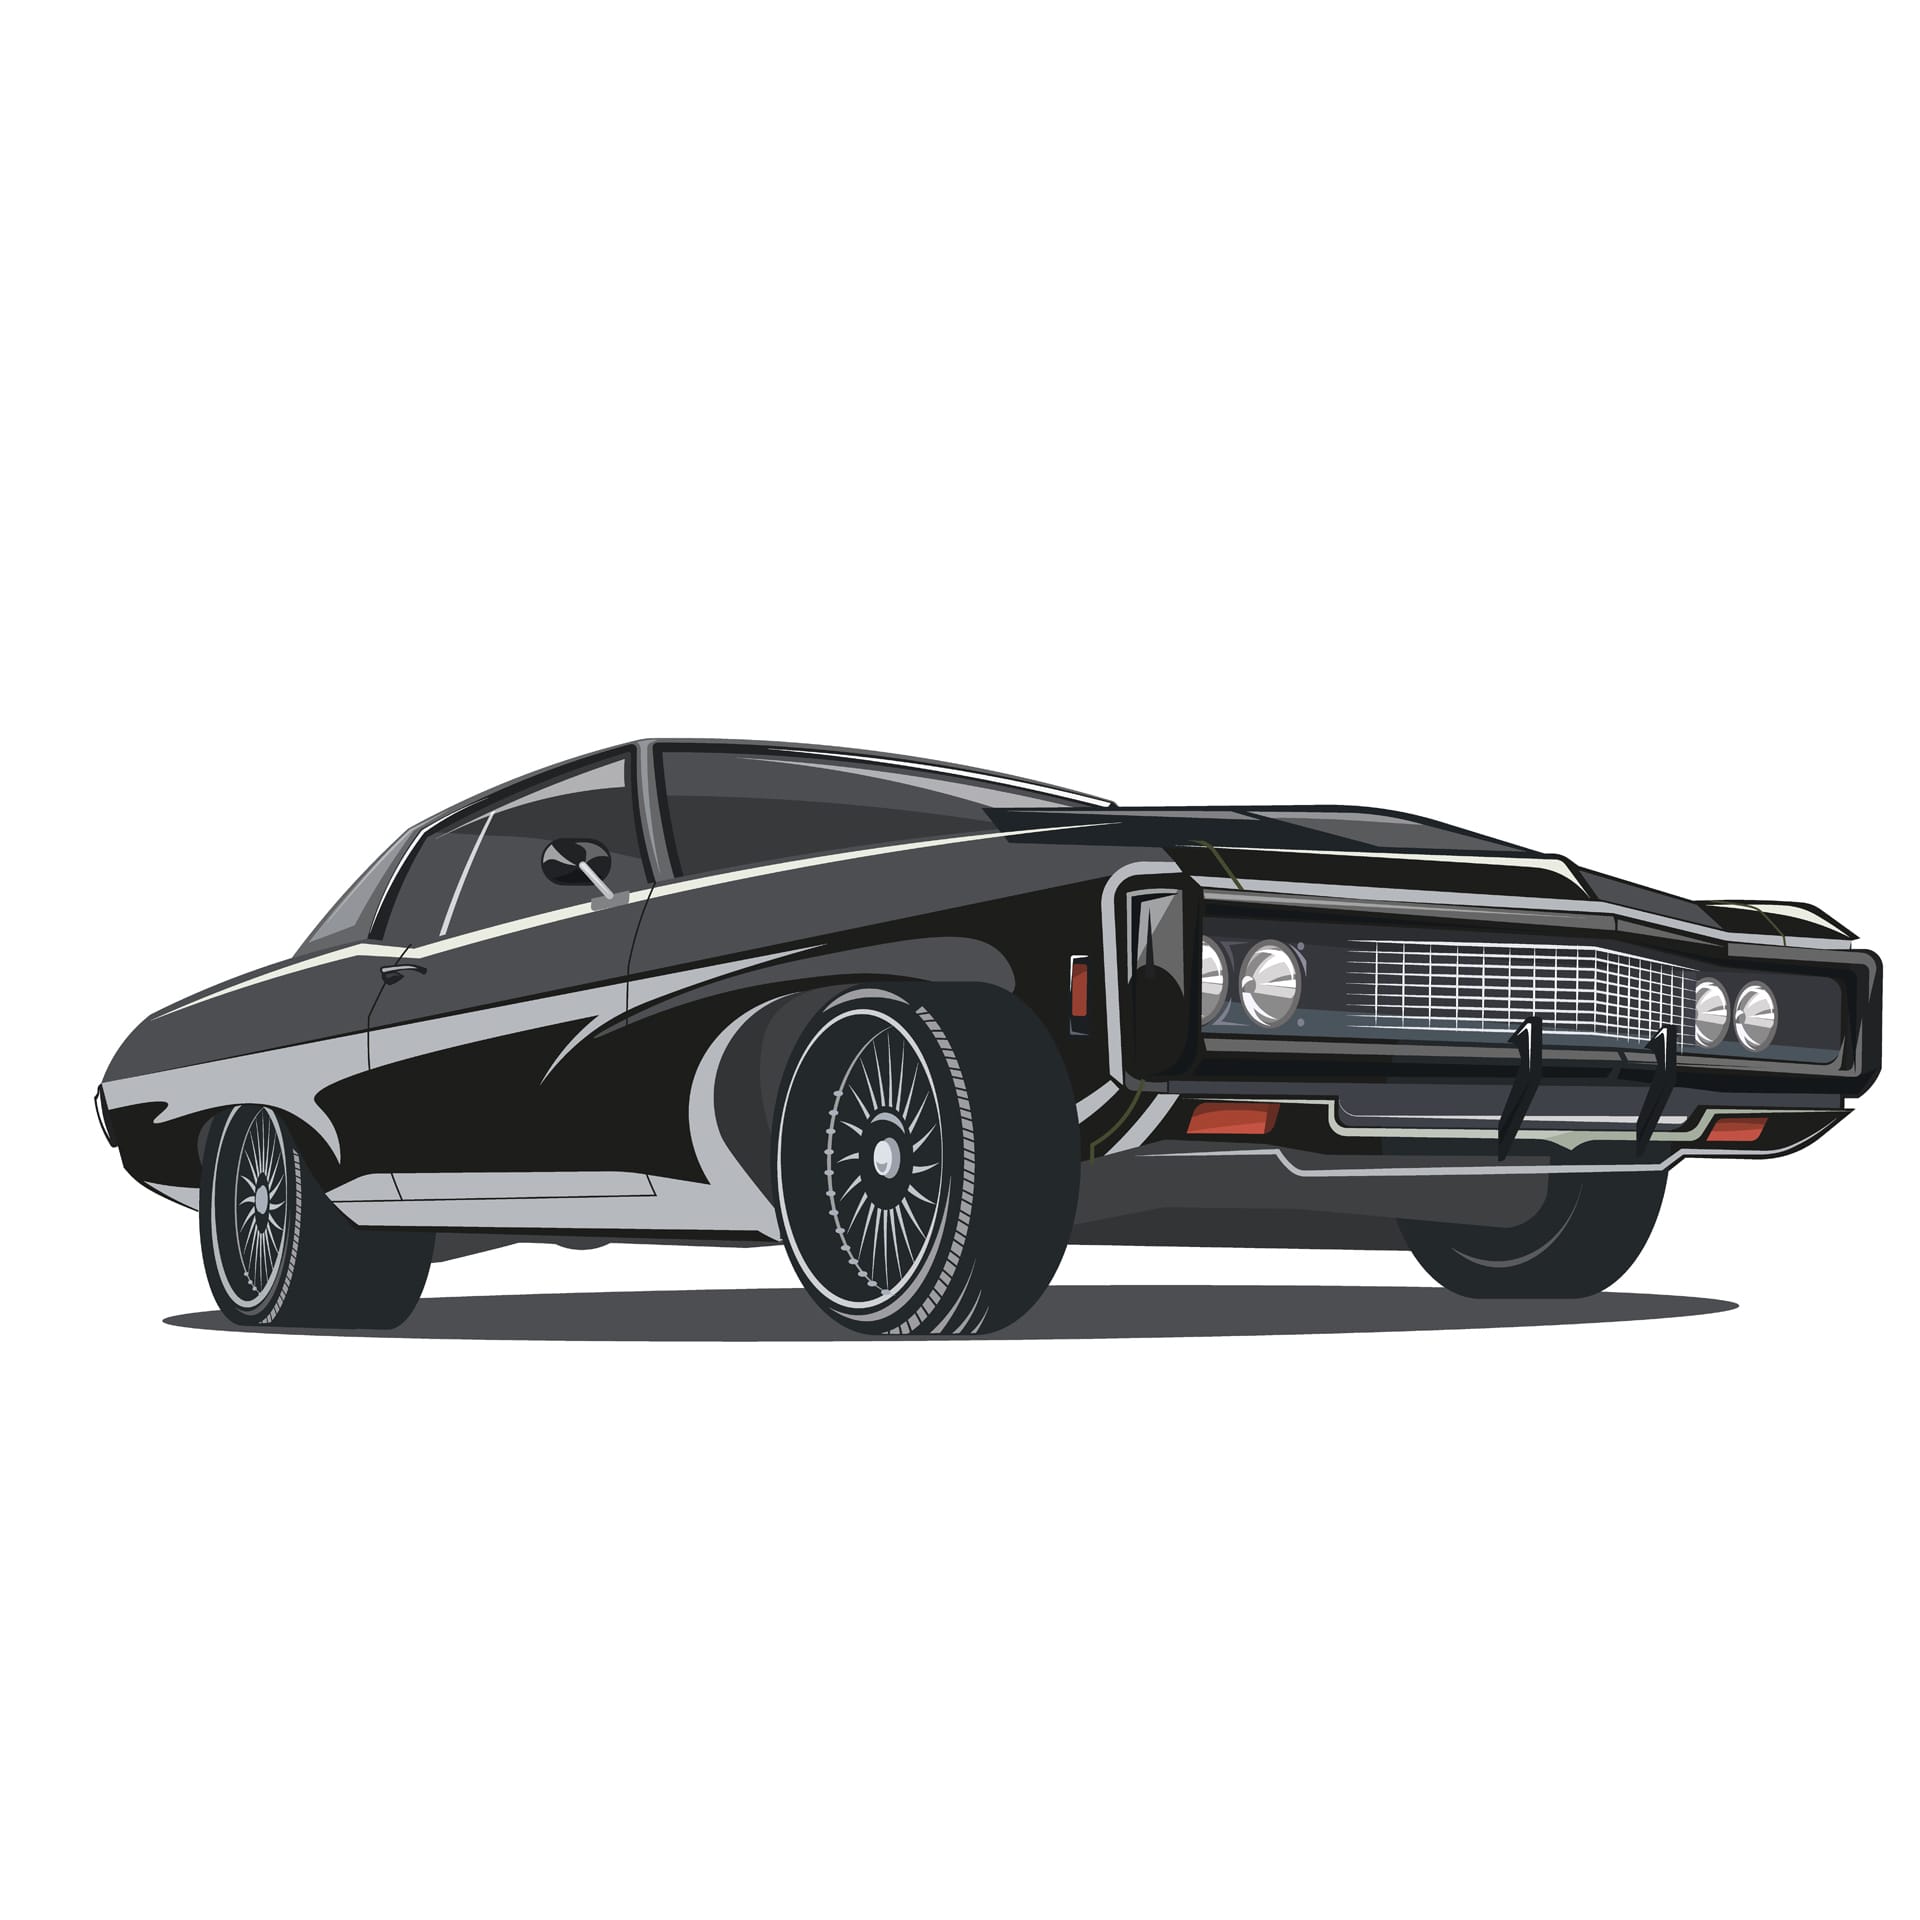 Car profile picture muscle car classic vehicle poster